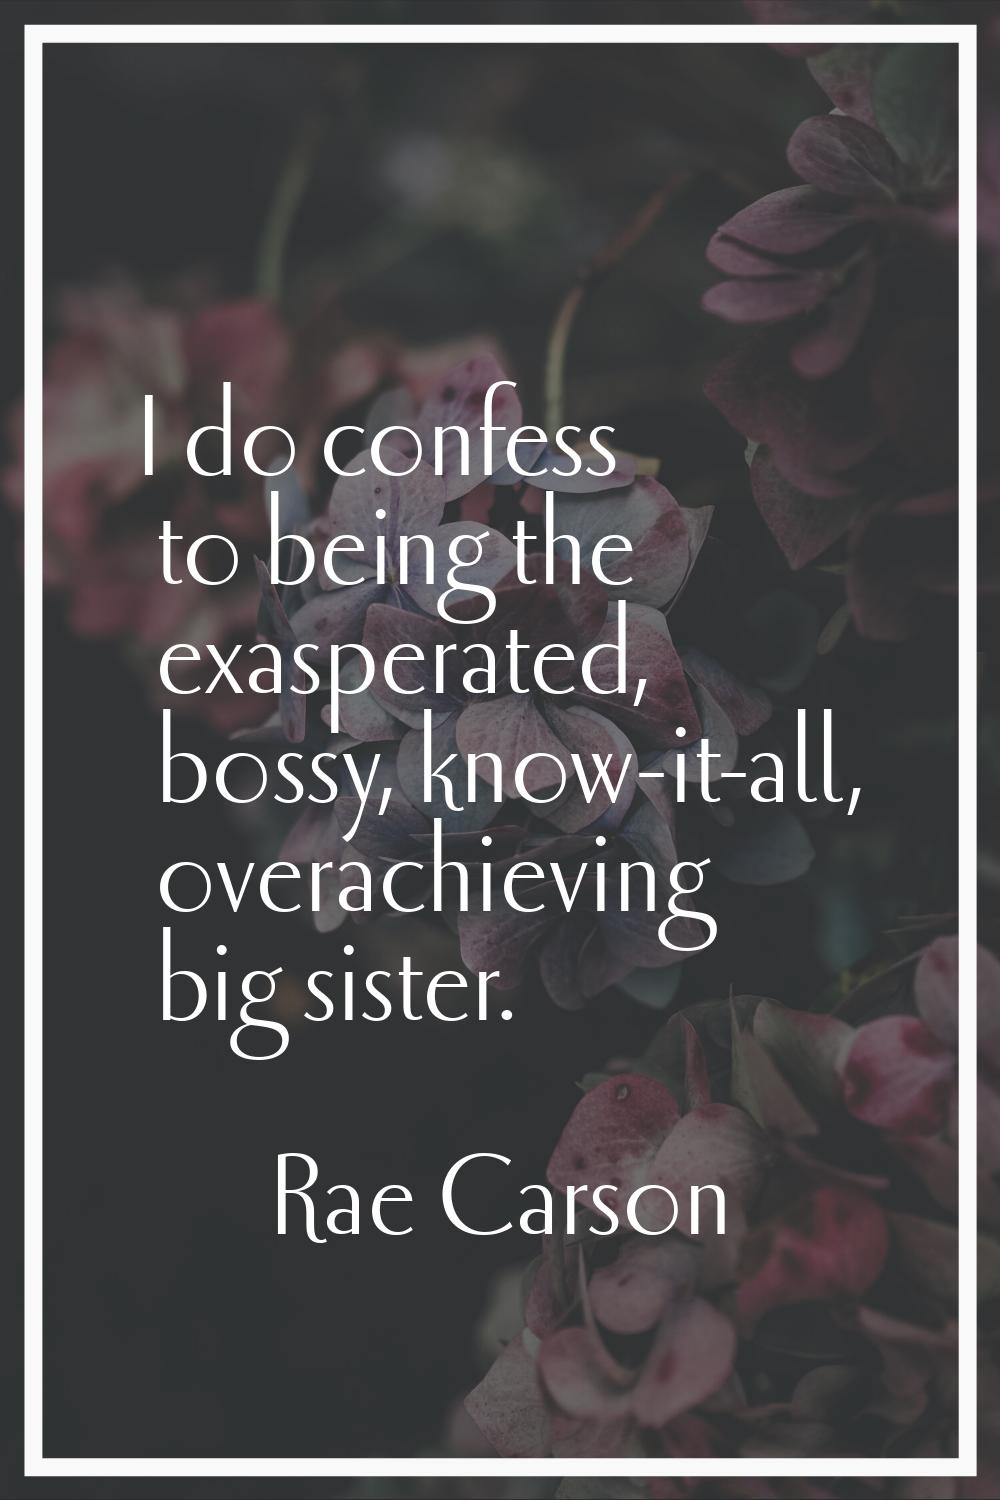 I do confess to being the exasperated, bossy, know-it-all, overachieving big sister.